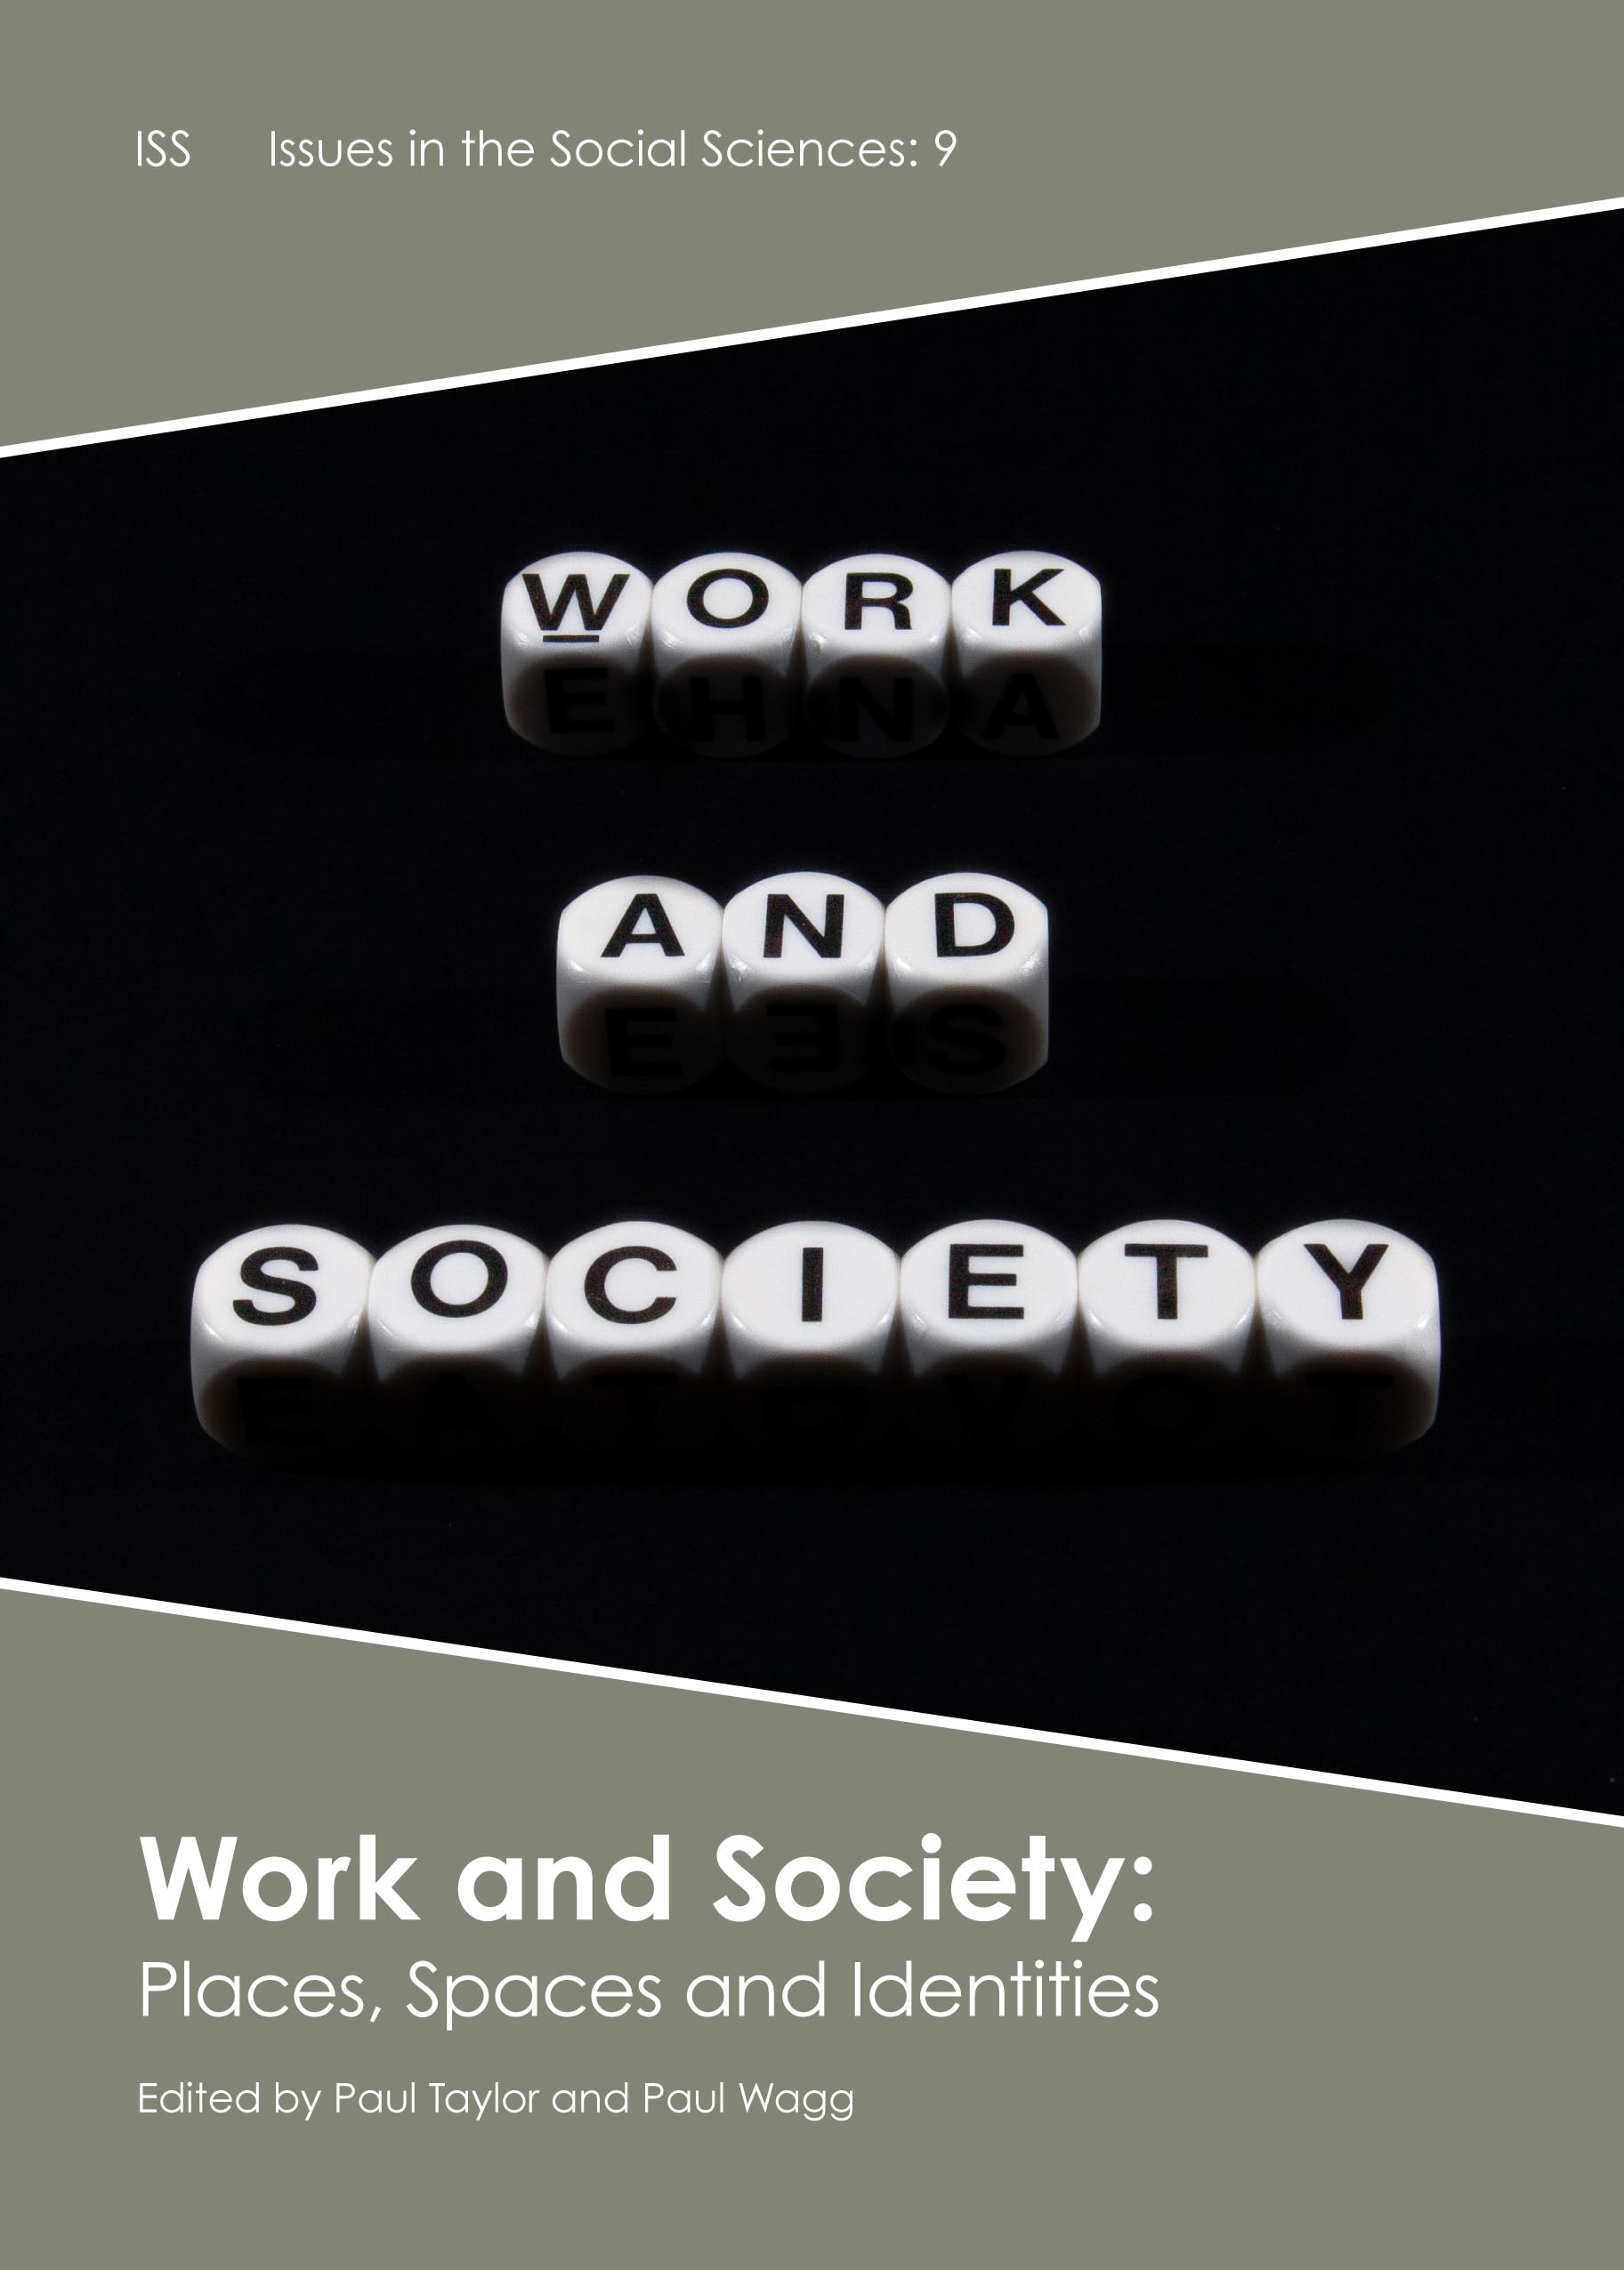 Work and Society: Places, Spaces and Identities